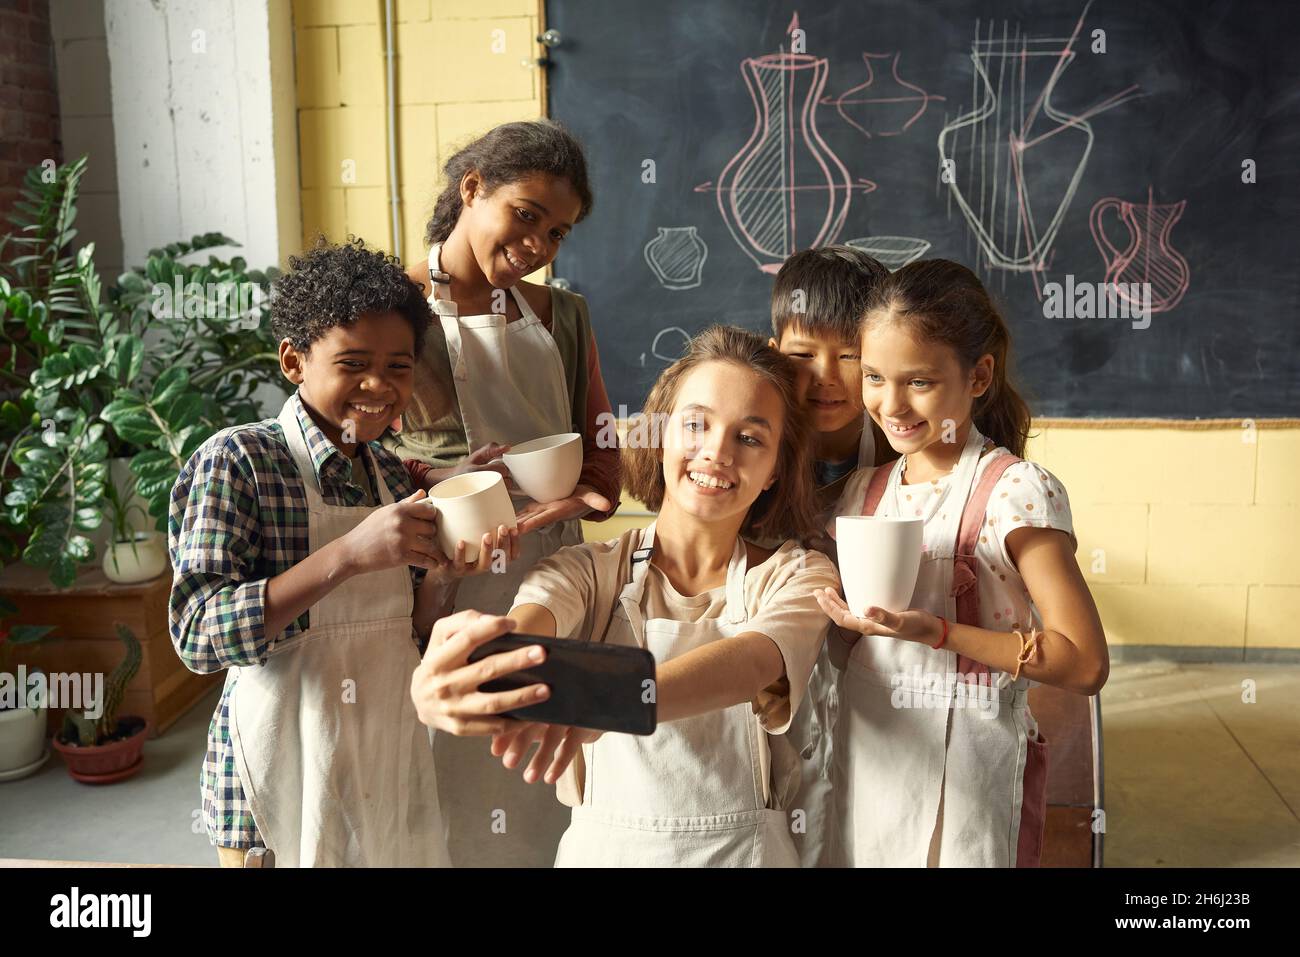 Happy young pottery craft teacher making selfie with group of diligent learners holding handmade clay mugs Stock Photo